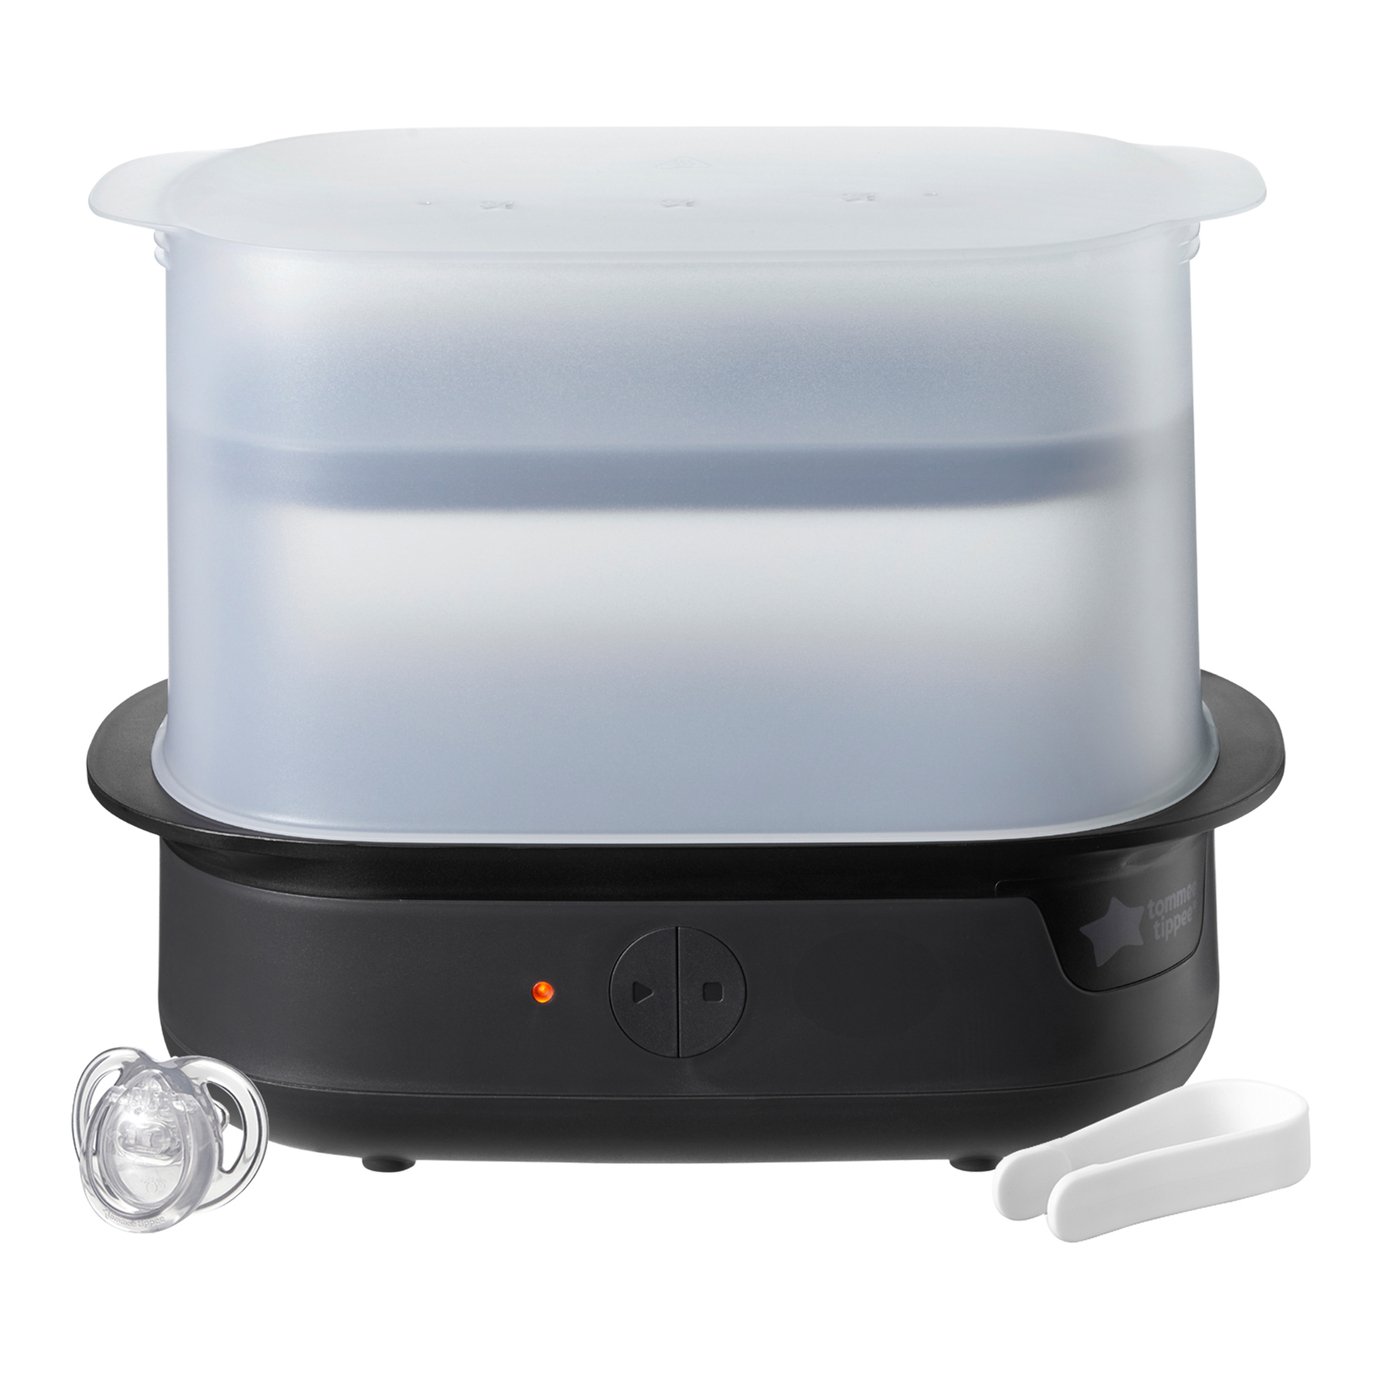 tommee tippee electric steriliser review